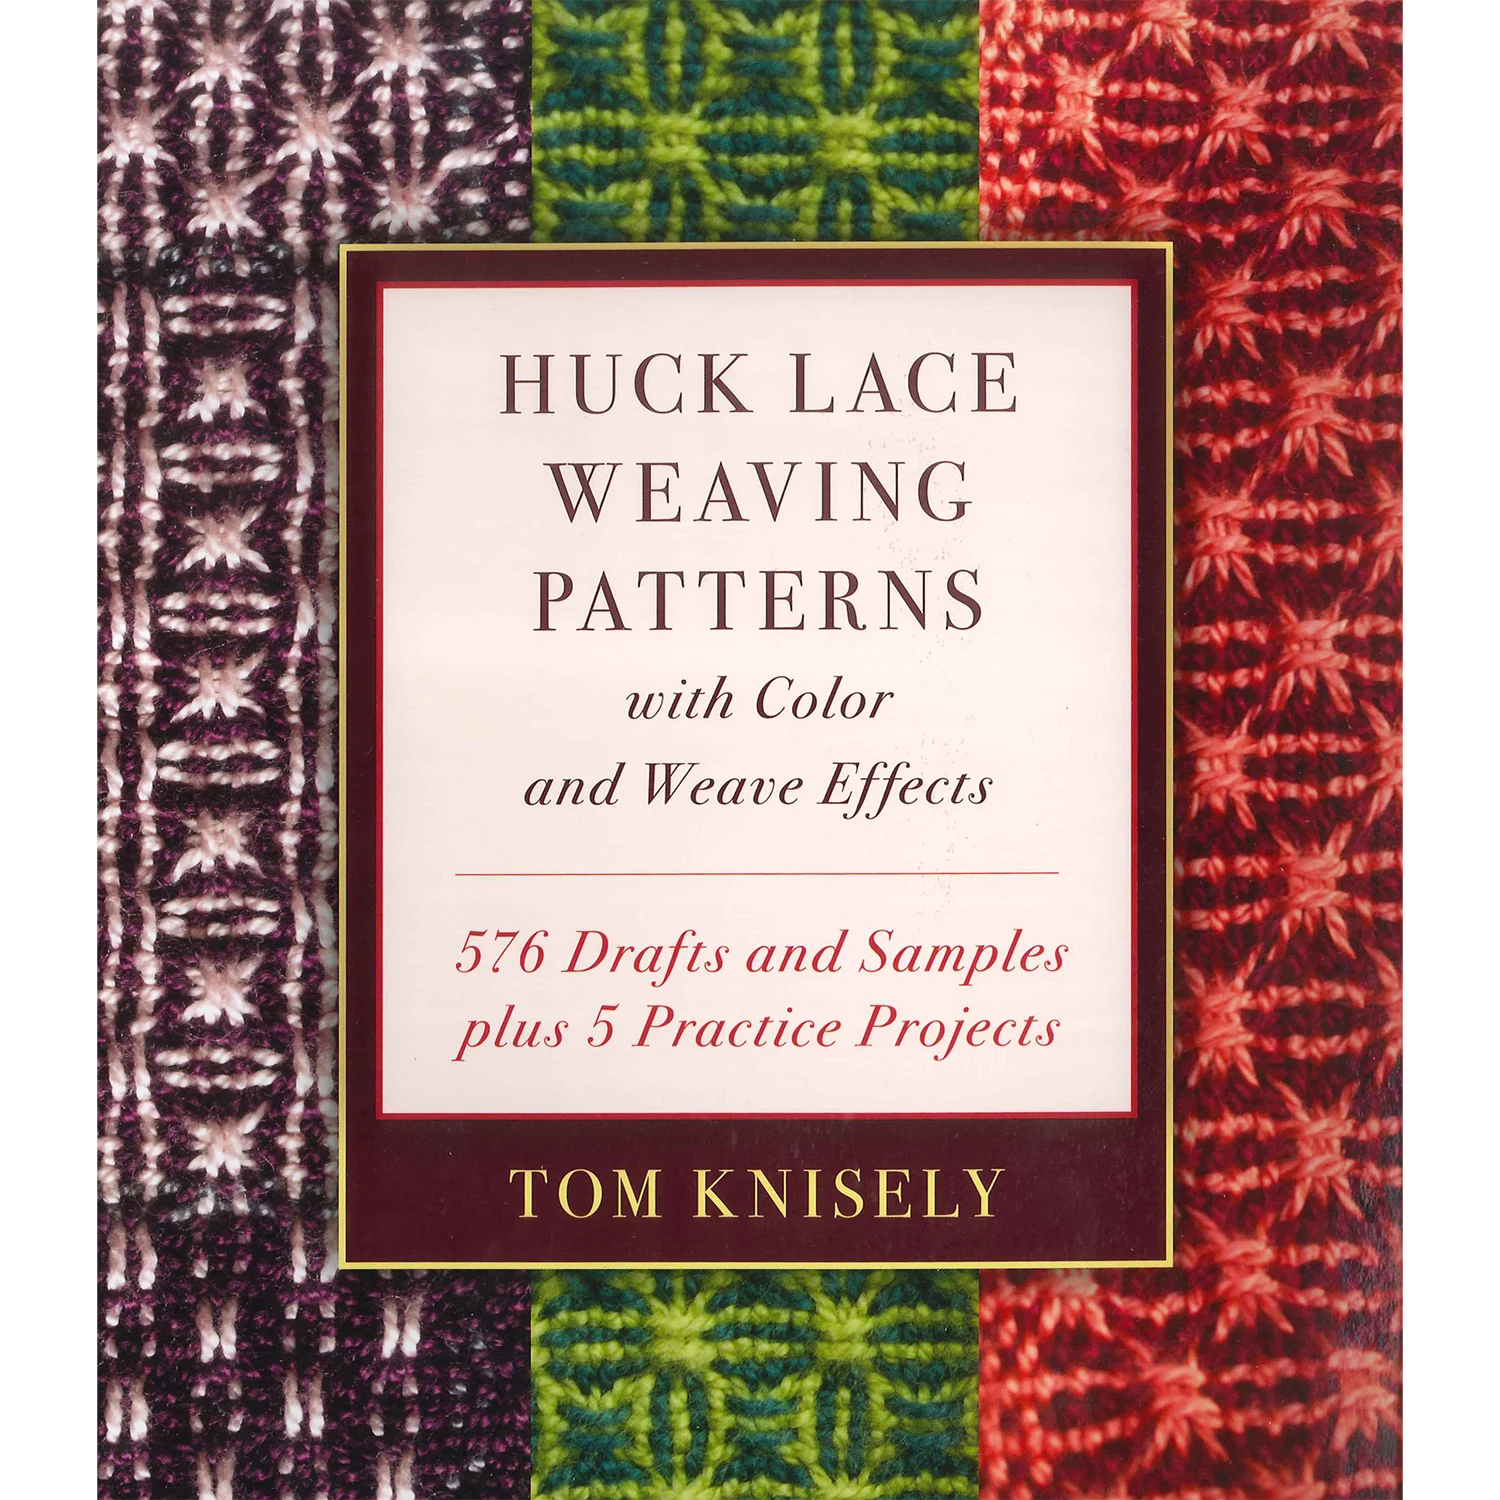 Huck Lace Weaving Patterns with Color and Weave Effects